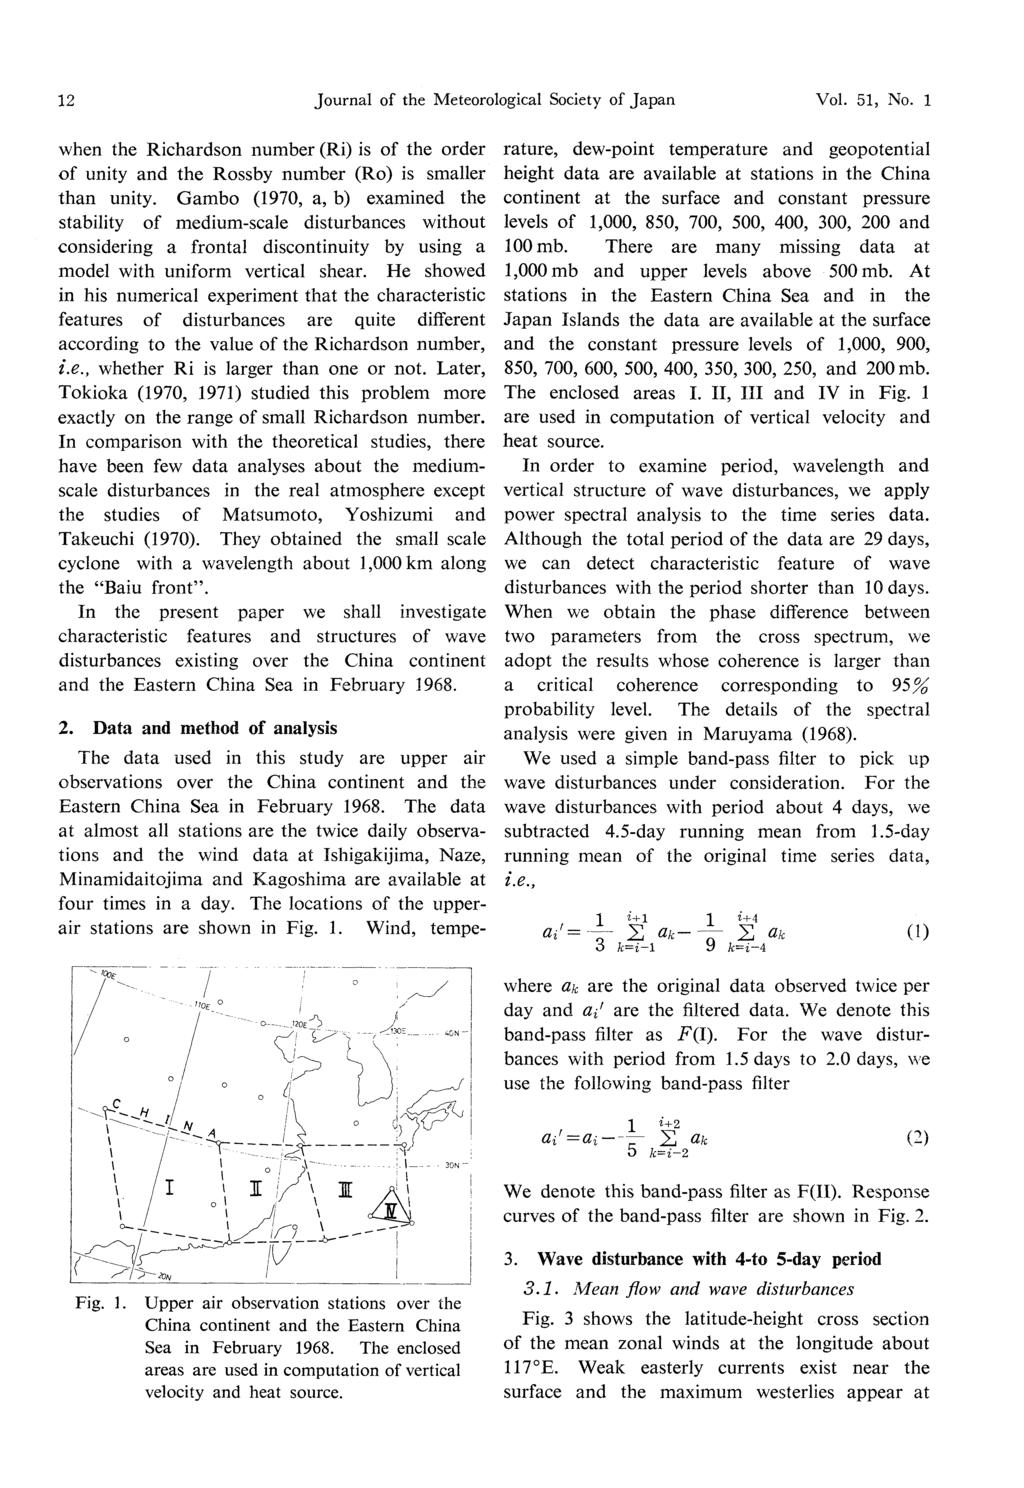 12 Journal of the Meteorological Society of Japan Vol. 51, No. 1 when the Richardson number (Ri) is of the order of unity and the Rossby number (Ro) is smaller than unity.